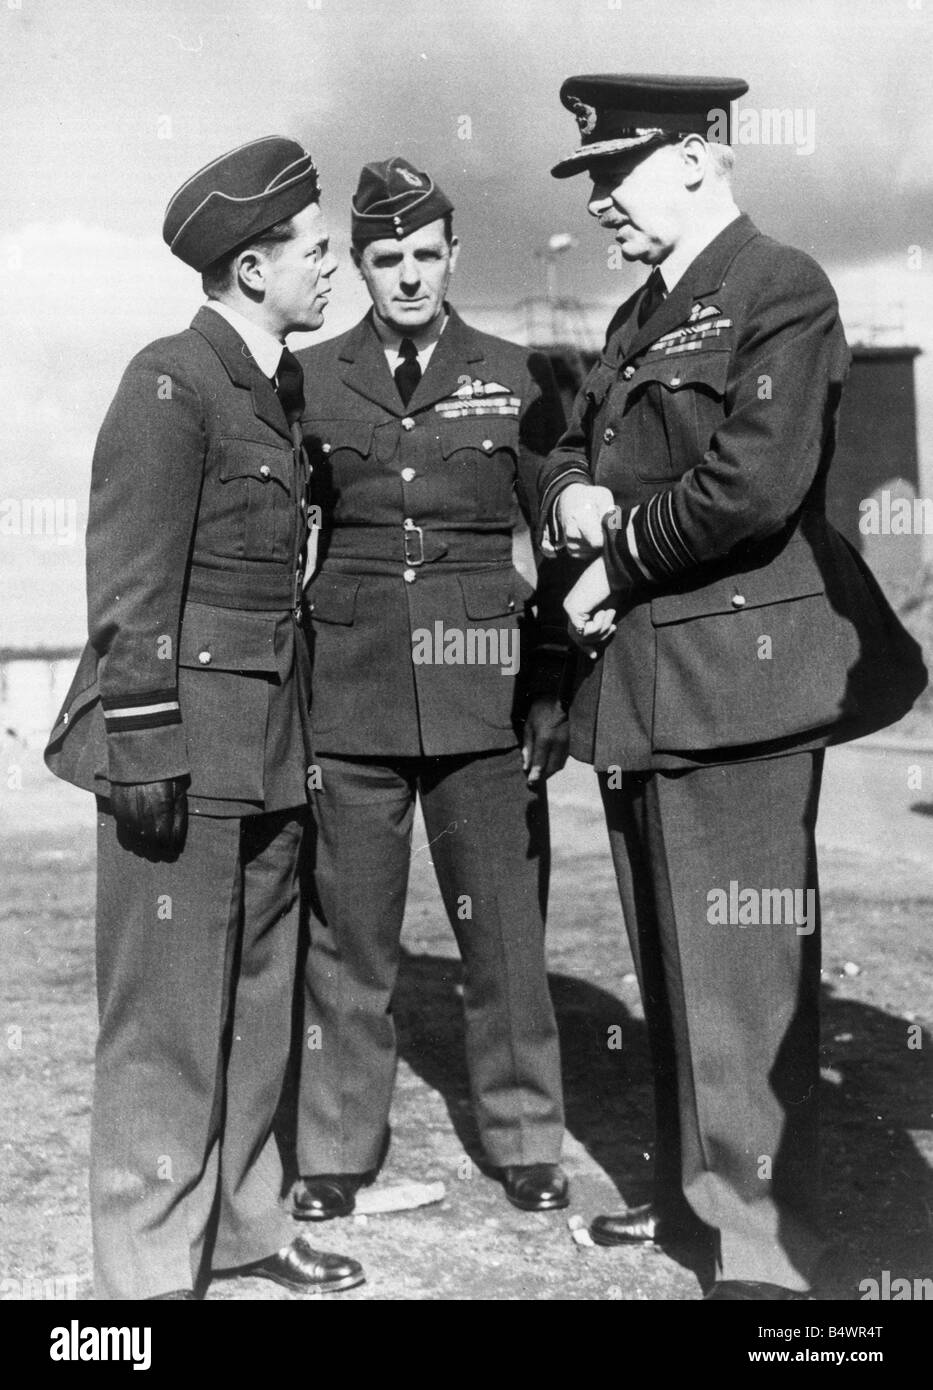 Air Marshal Sir Arthur Bomber Harris commander in chief of Bombing Command chatting with Air Commodores in the RAF during World Stock Photo